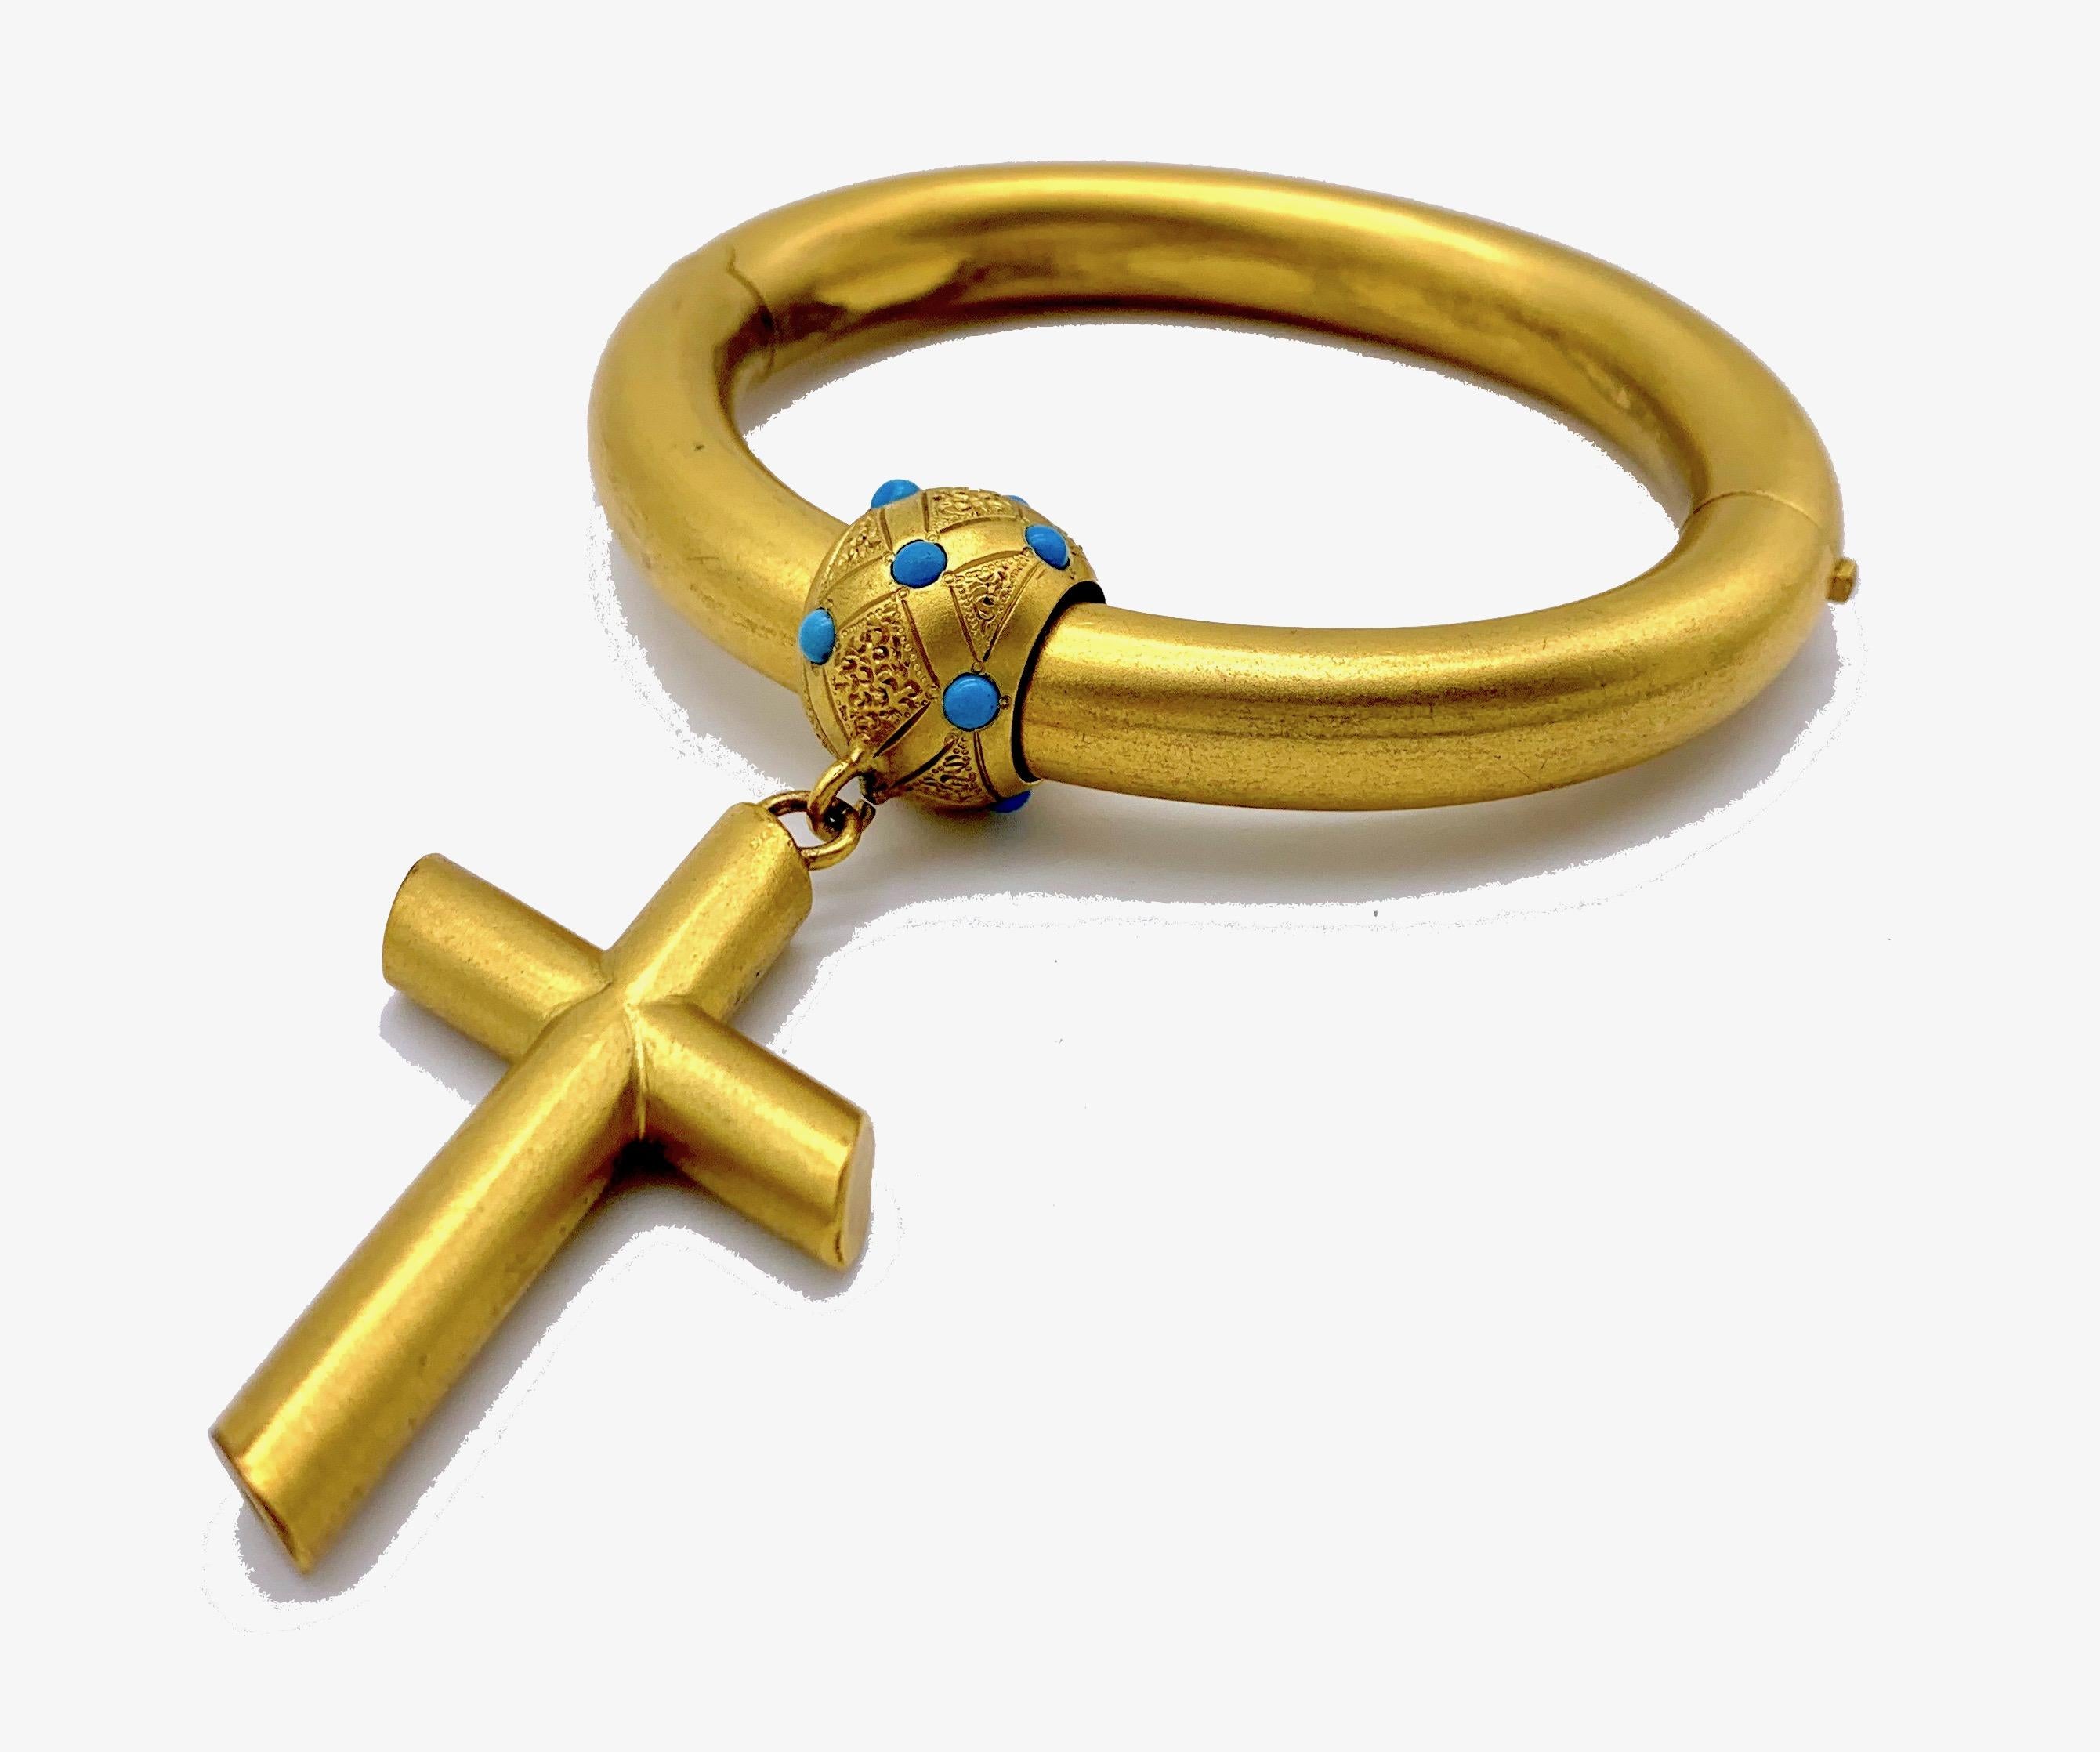 Stylish and unusual High Victorian fire gilt hinged bangle with a large removable cross.
The cross is suspended from a large finely engraved ball shaped ring and can be worn separately on a chain or a ribbon. 
The measurements of width and depth are